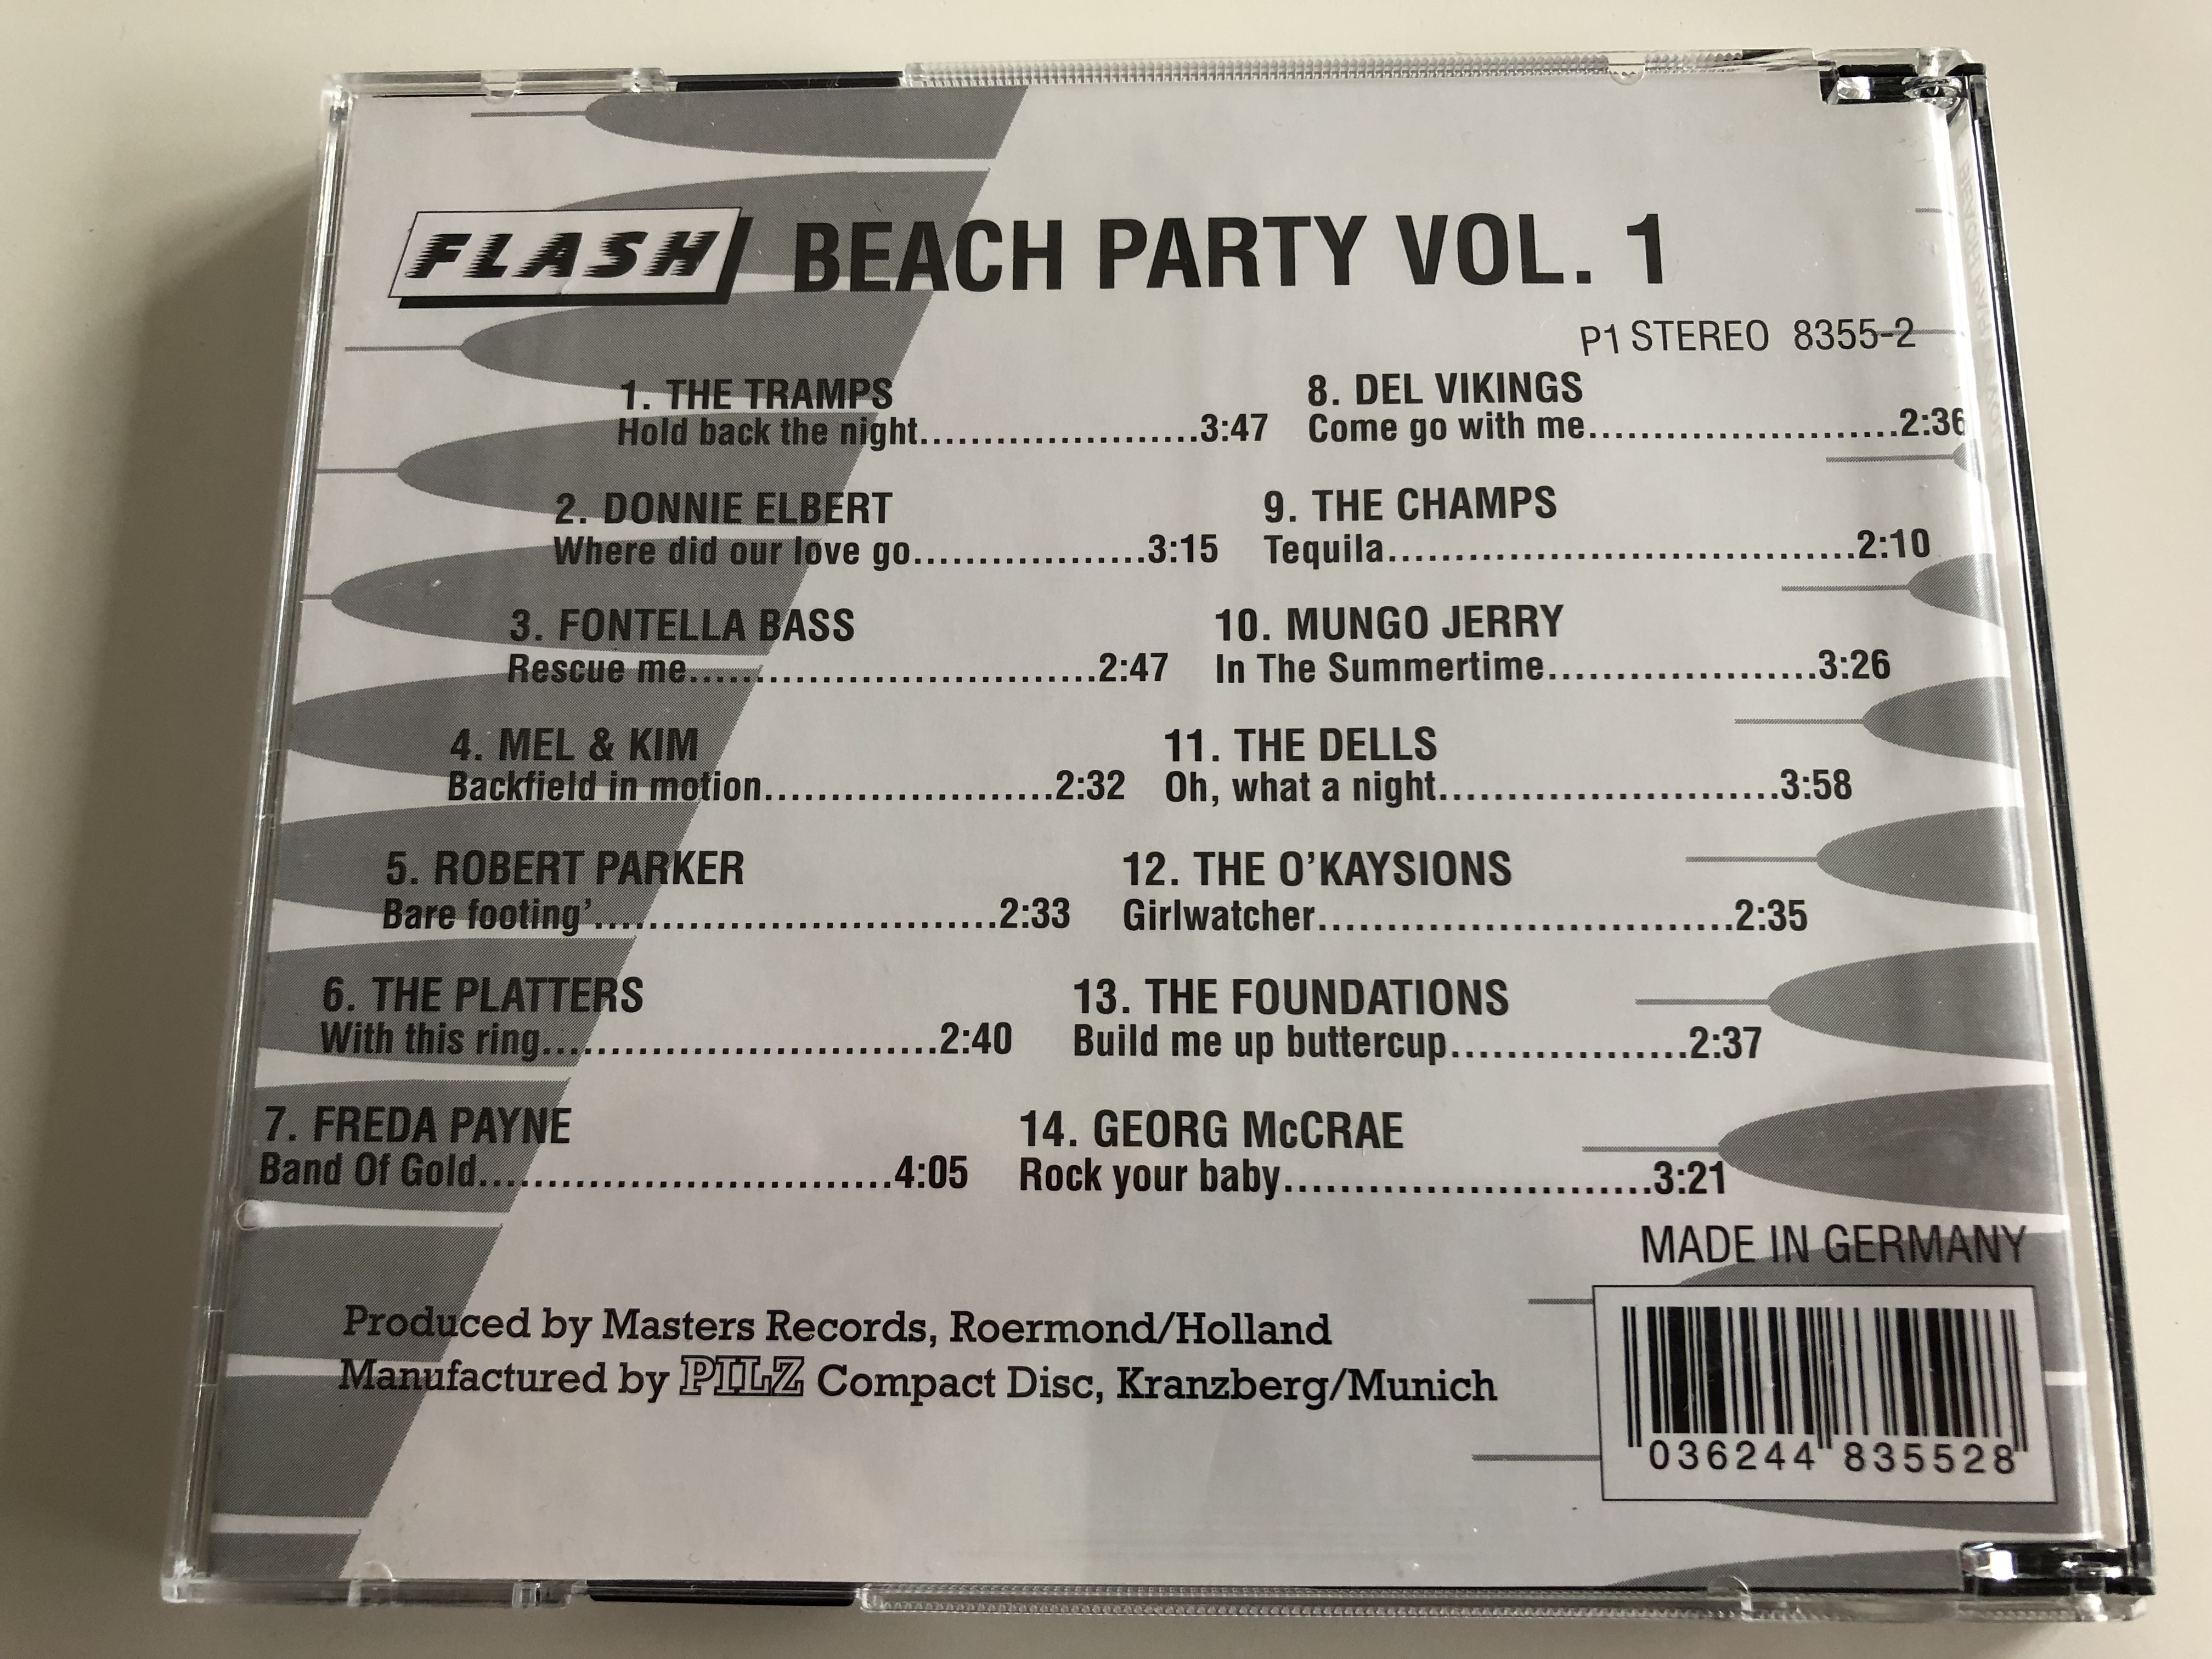 beach-party-vol.1-the-trammps-hold-back-the-night-mungo-jerry-in-the-summertime-the-dells-oh-what-a-night-george-mccrae-rock-your-baby-and-others-mungo-jerry-george-mccrae-master-3-.jpg